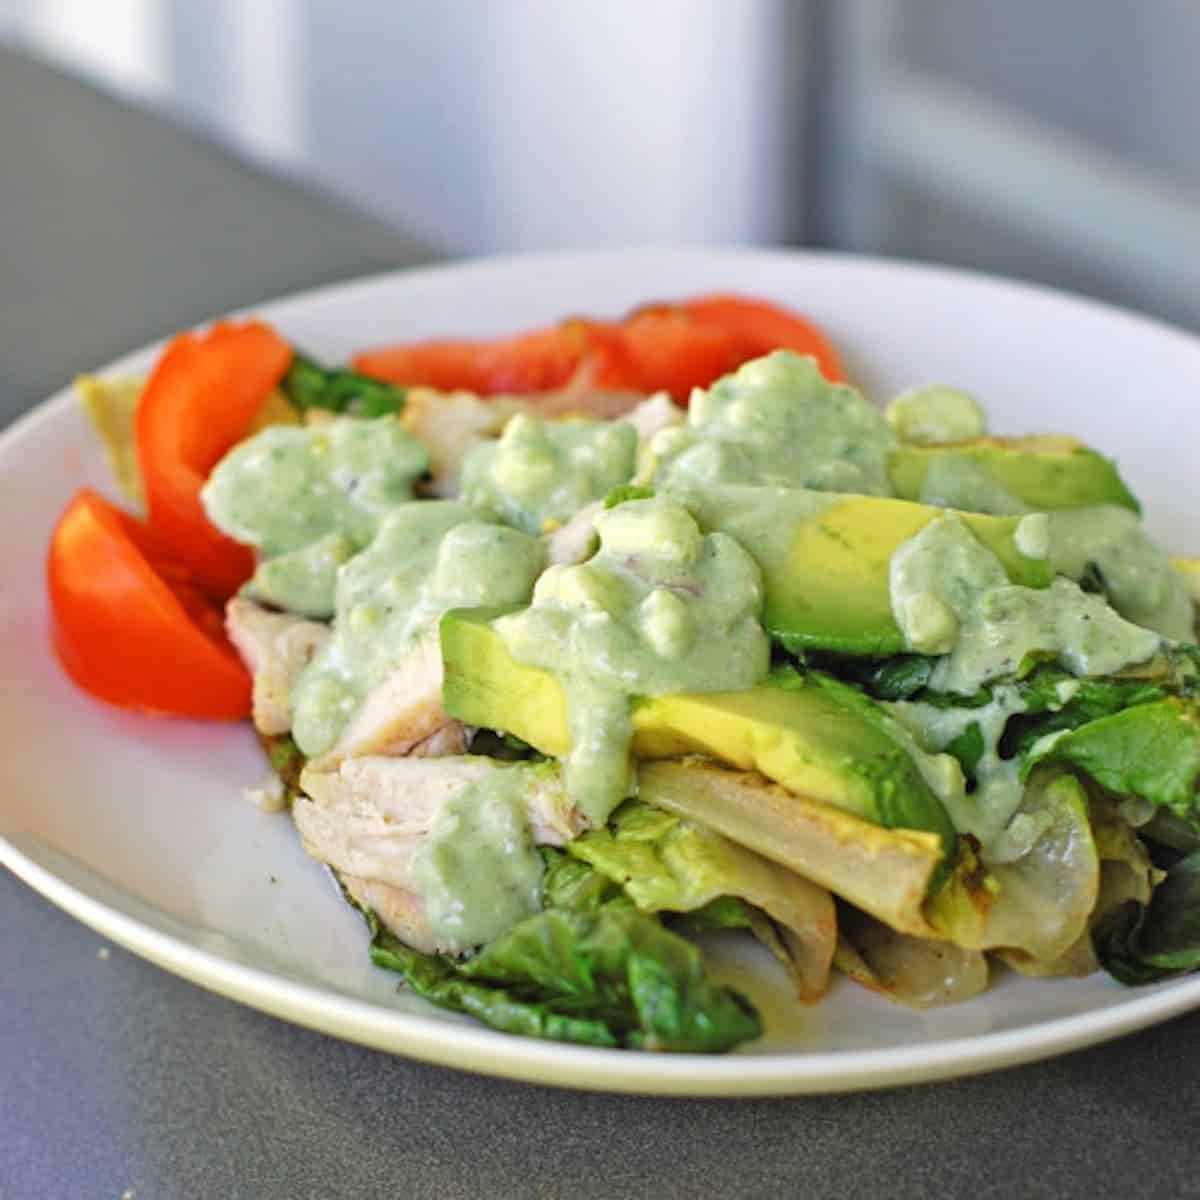 Avocado blue cheese dressing on grilled veggies.